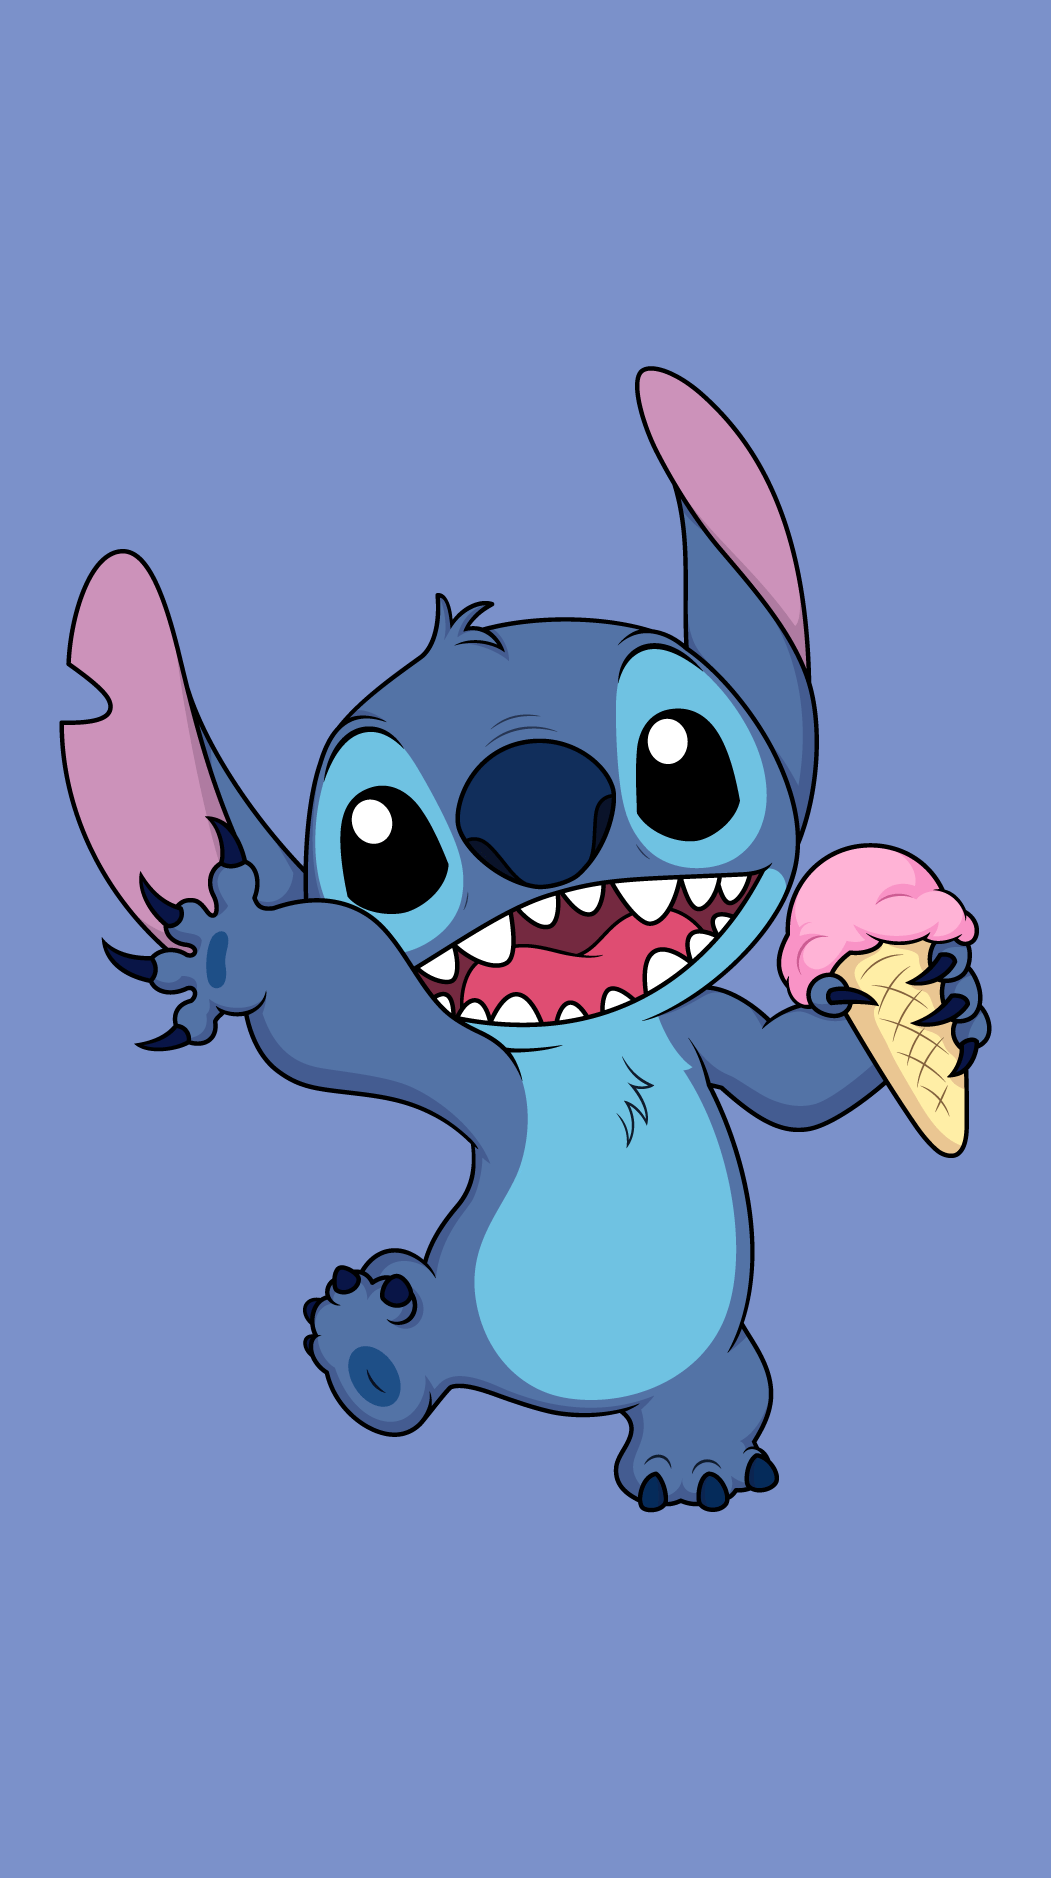 Cute Stitch iPhone Wallpapers  Top Free Cute Stitch iPhone Backgrounds   Wallpap  Imagem de fundo para iphone Wallpapers bonitos Wallpaper de  desenhos animados